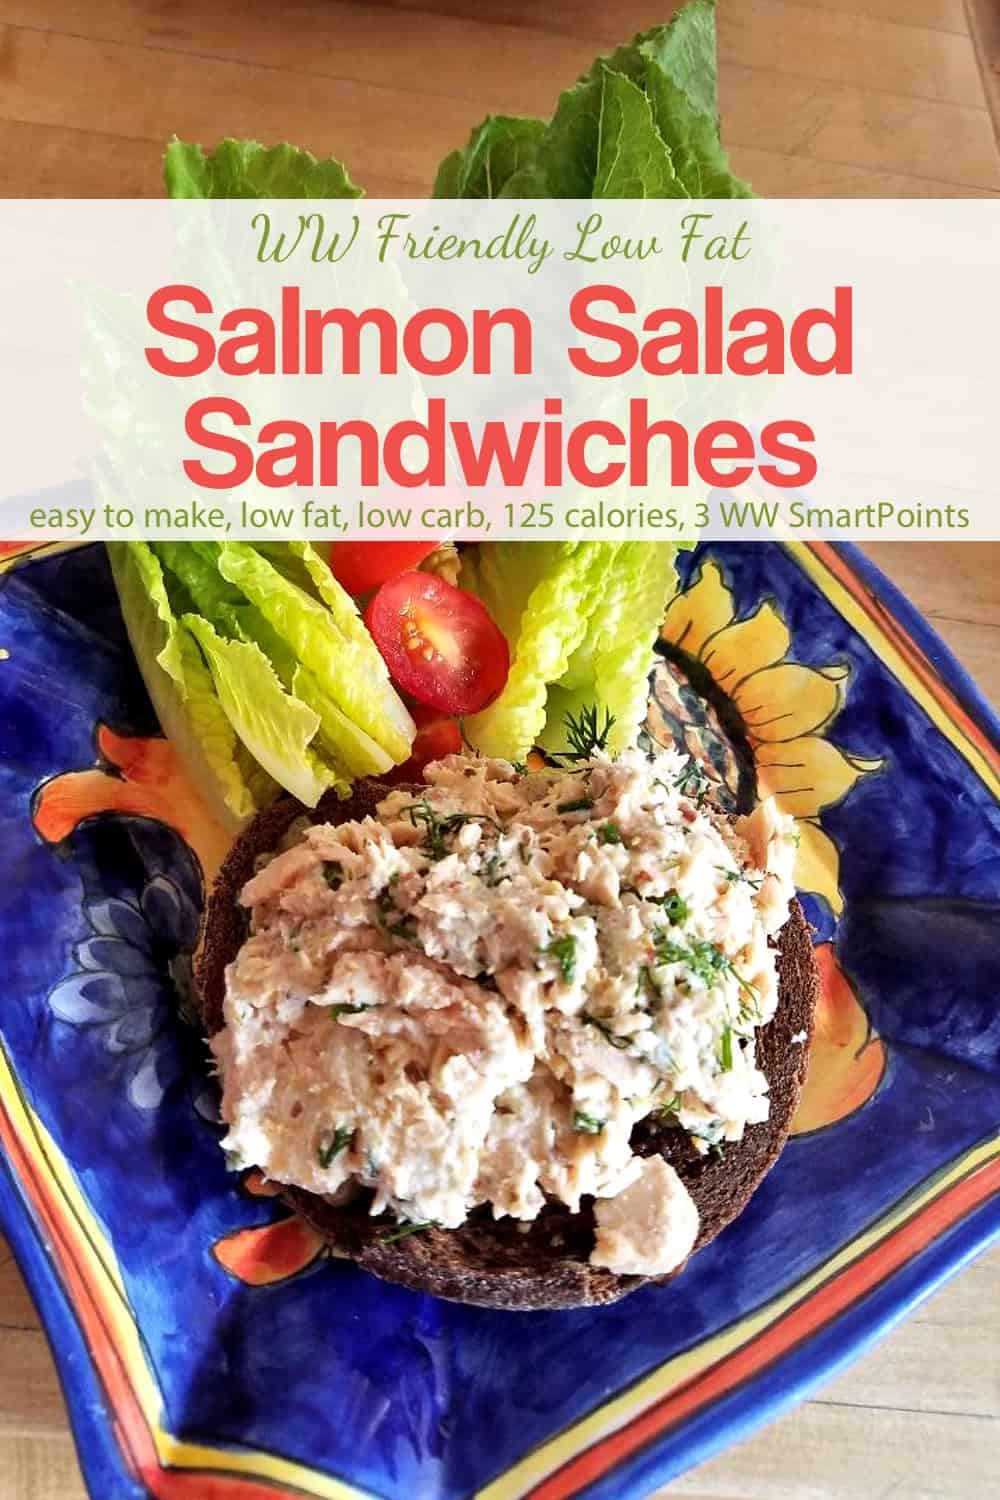 Open-face salmon salad sandwich on whole grain bread with romaine lettuce and cherry tomatoes on blue ceramic plate.